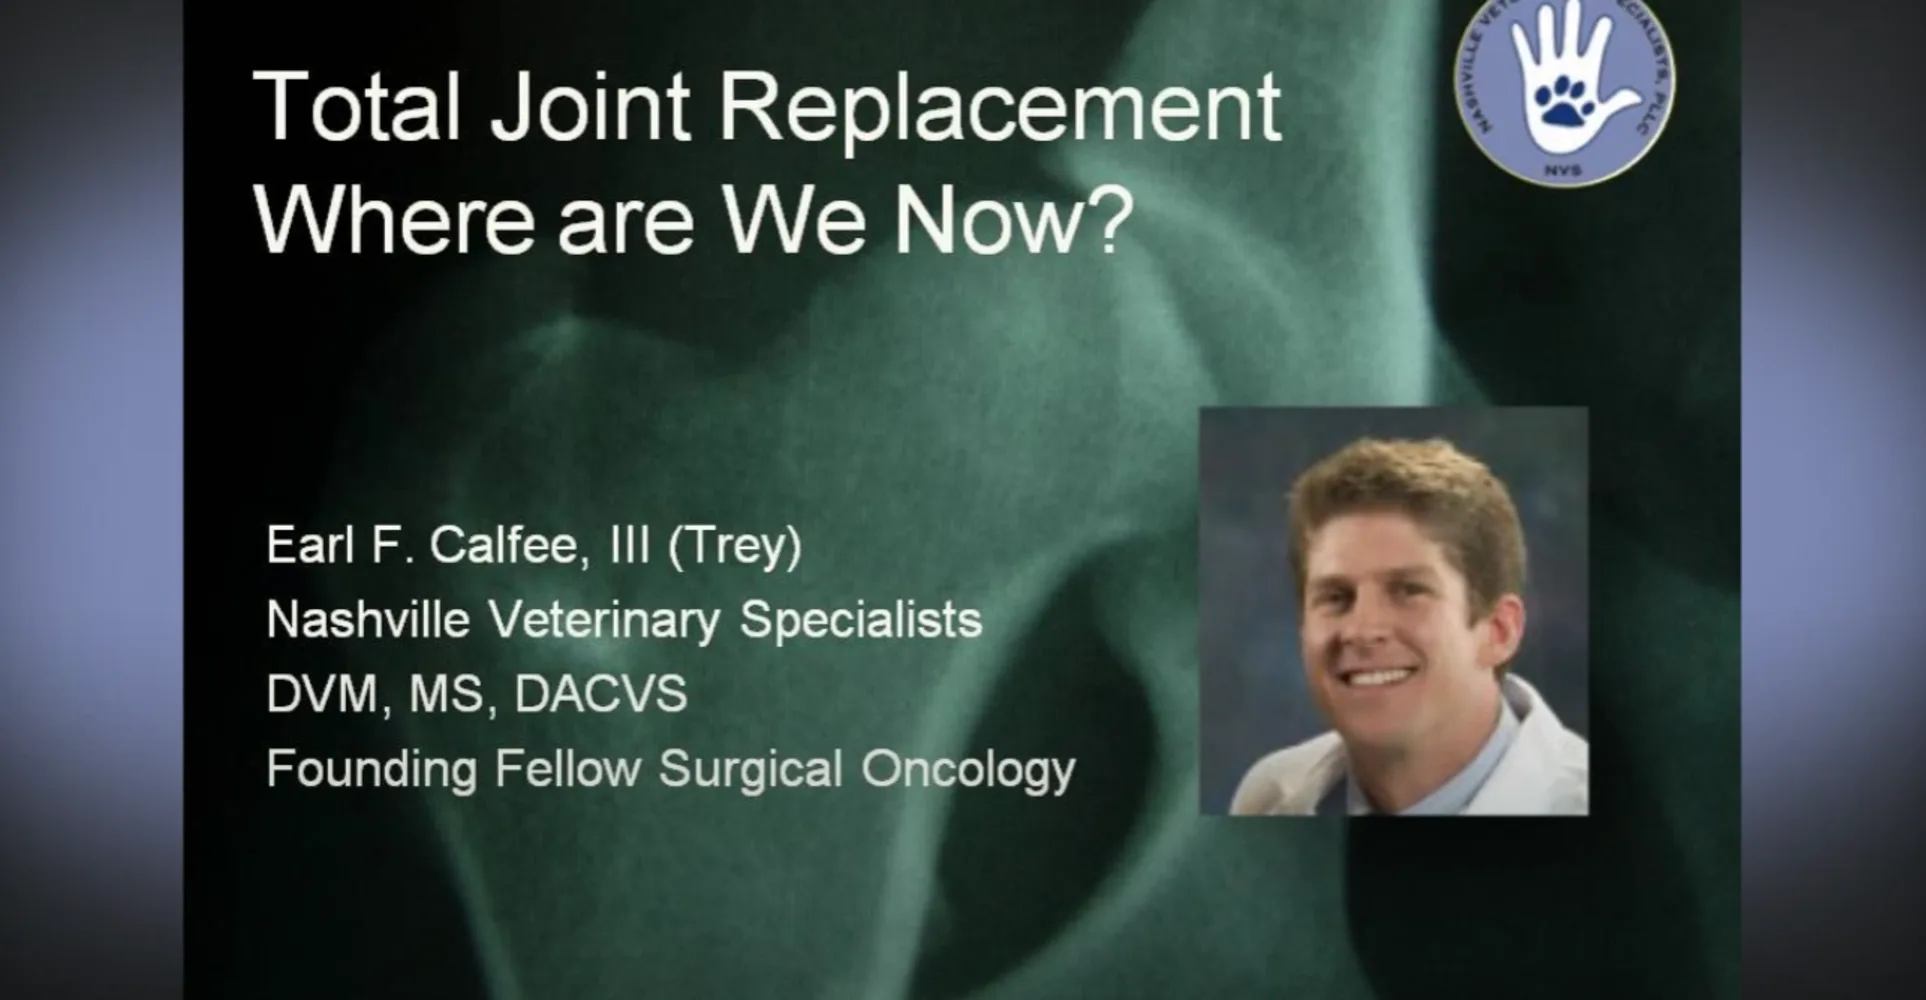 Total Joint Replacement, Veterinary Options Video at NVS